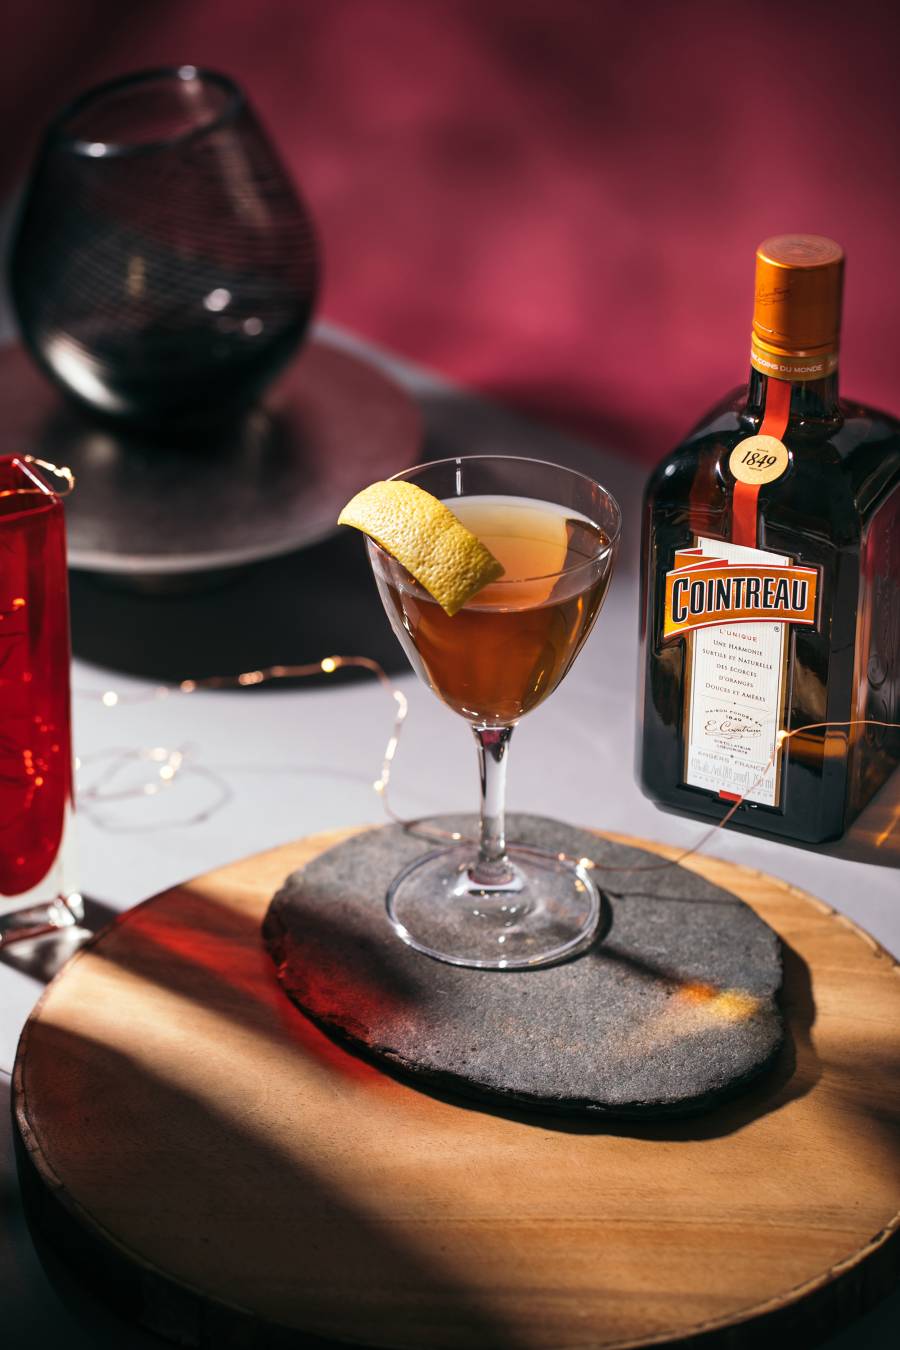 Golden Globes 2019: Cocktails Inspired by The Favorite, Black Panther and Other Nominees